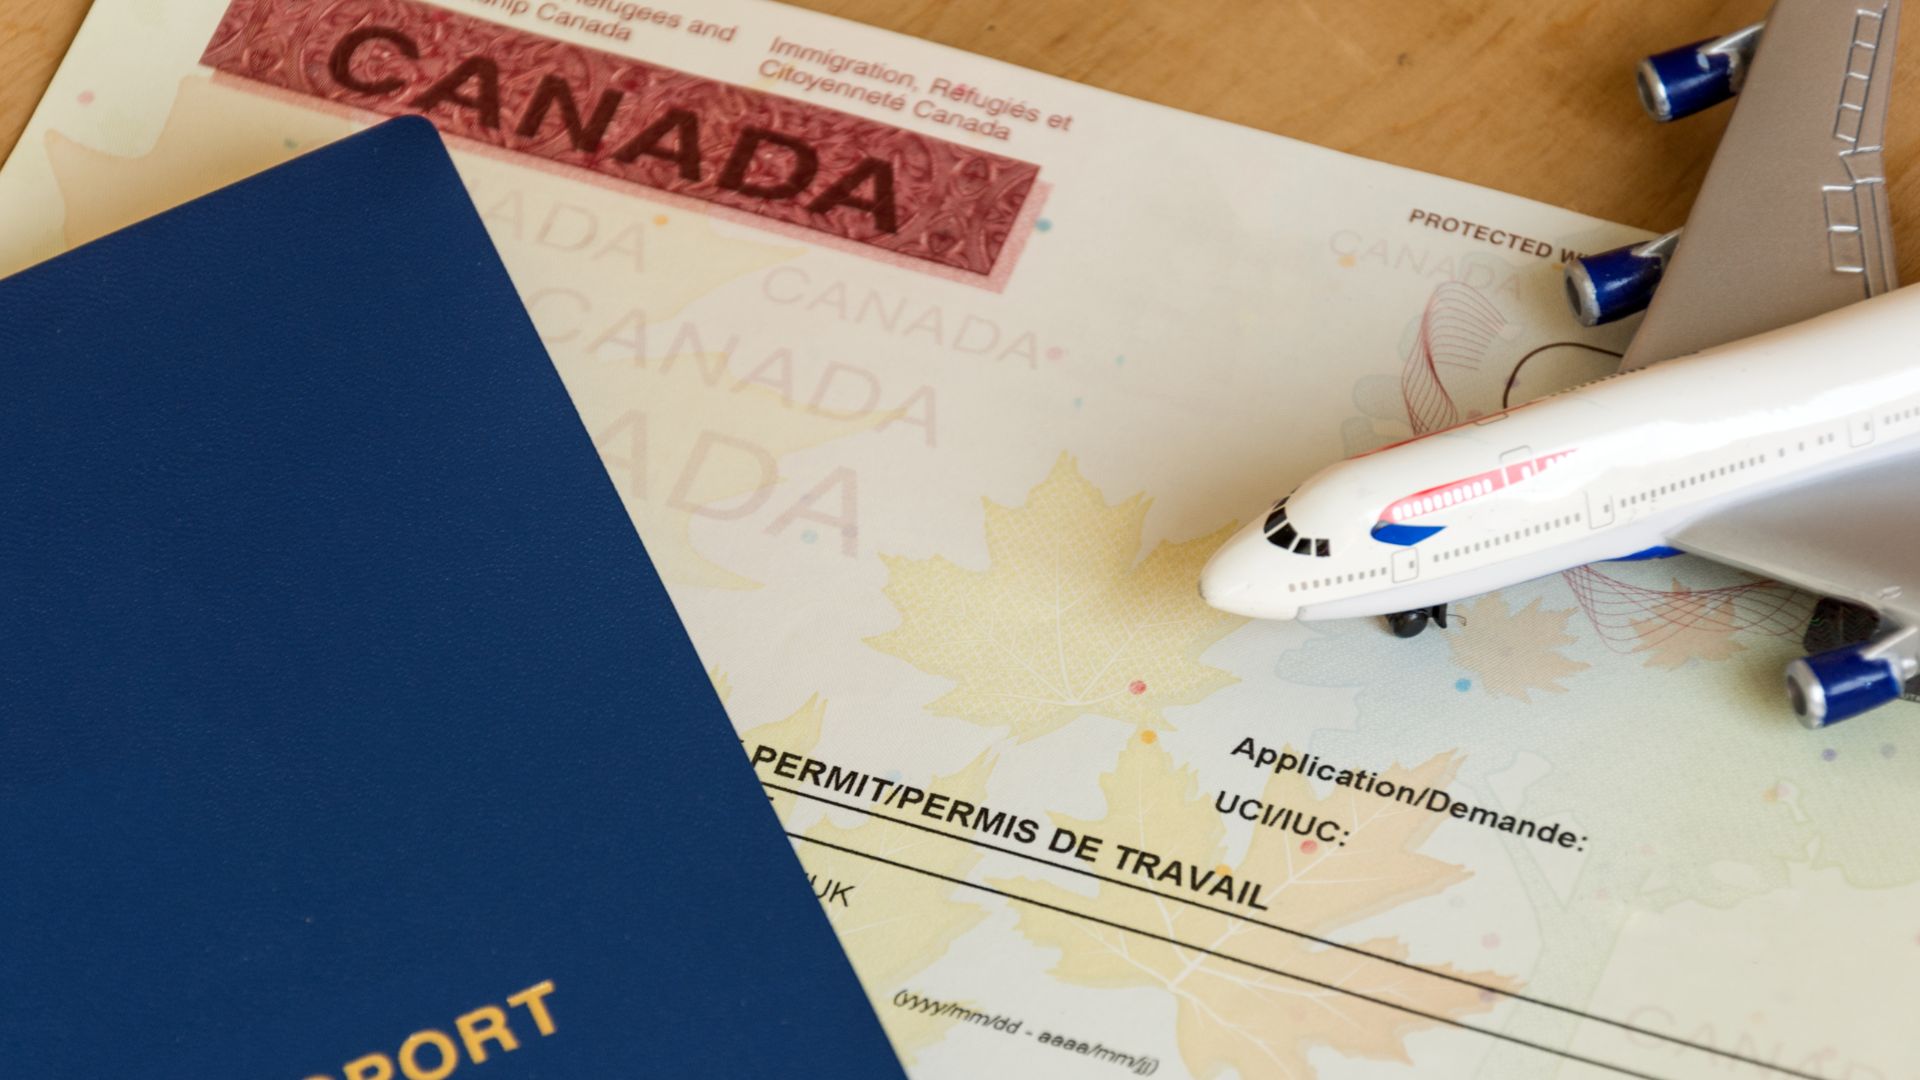 Temporary Permit to Travel to Canada